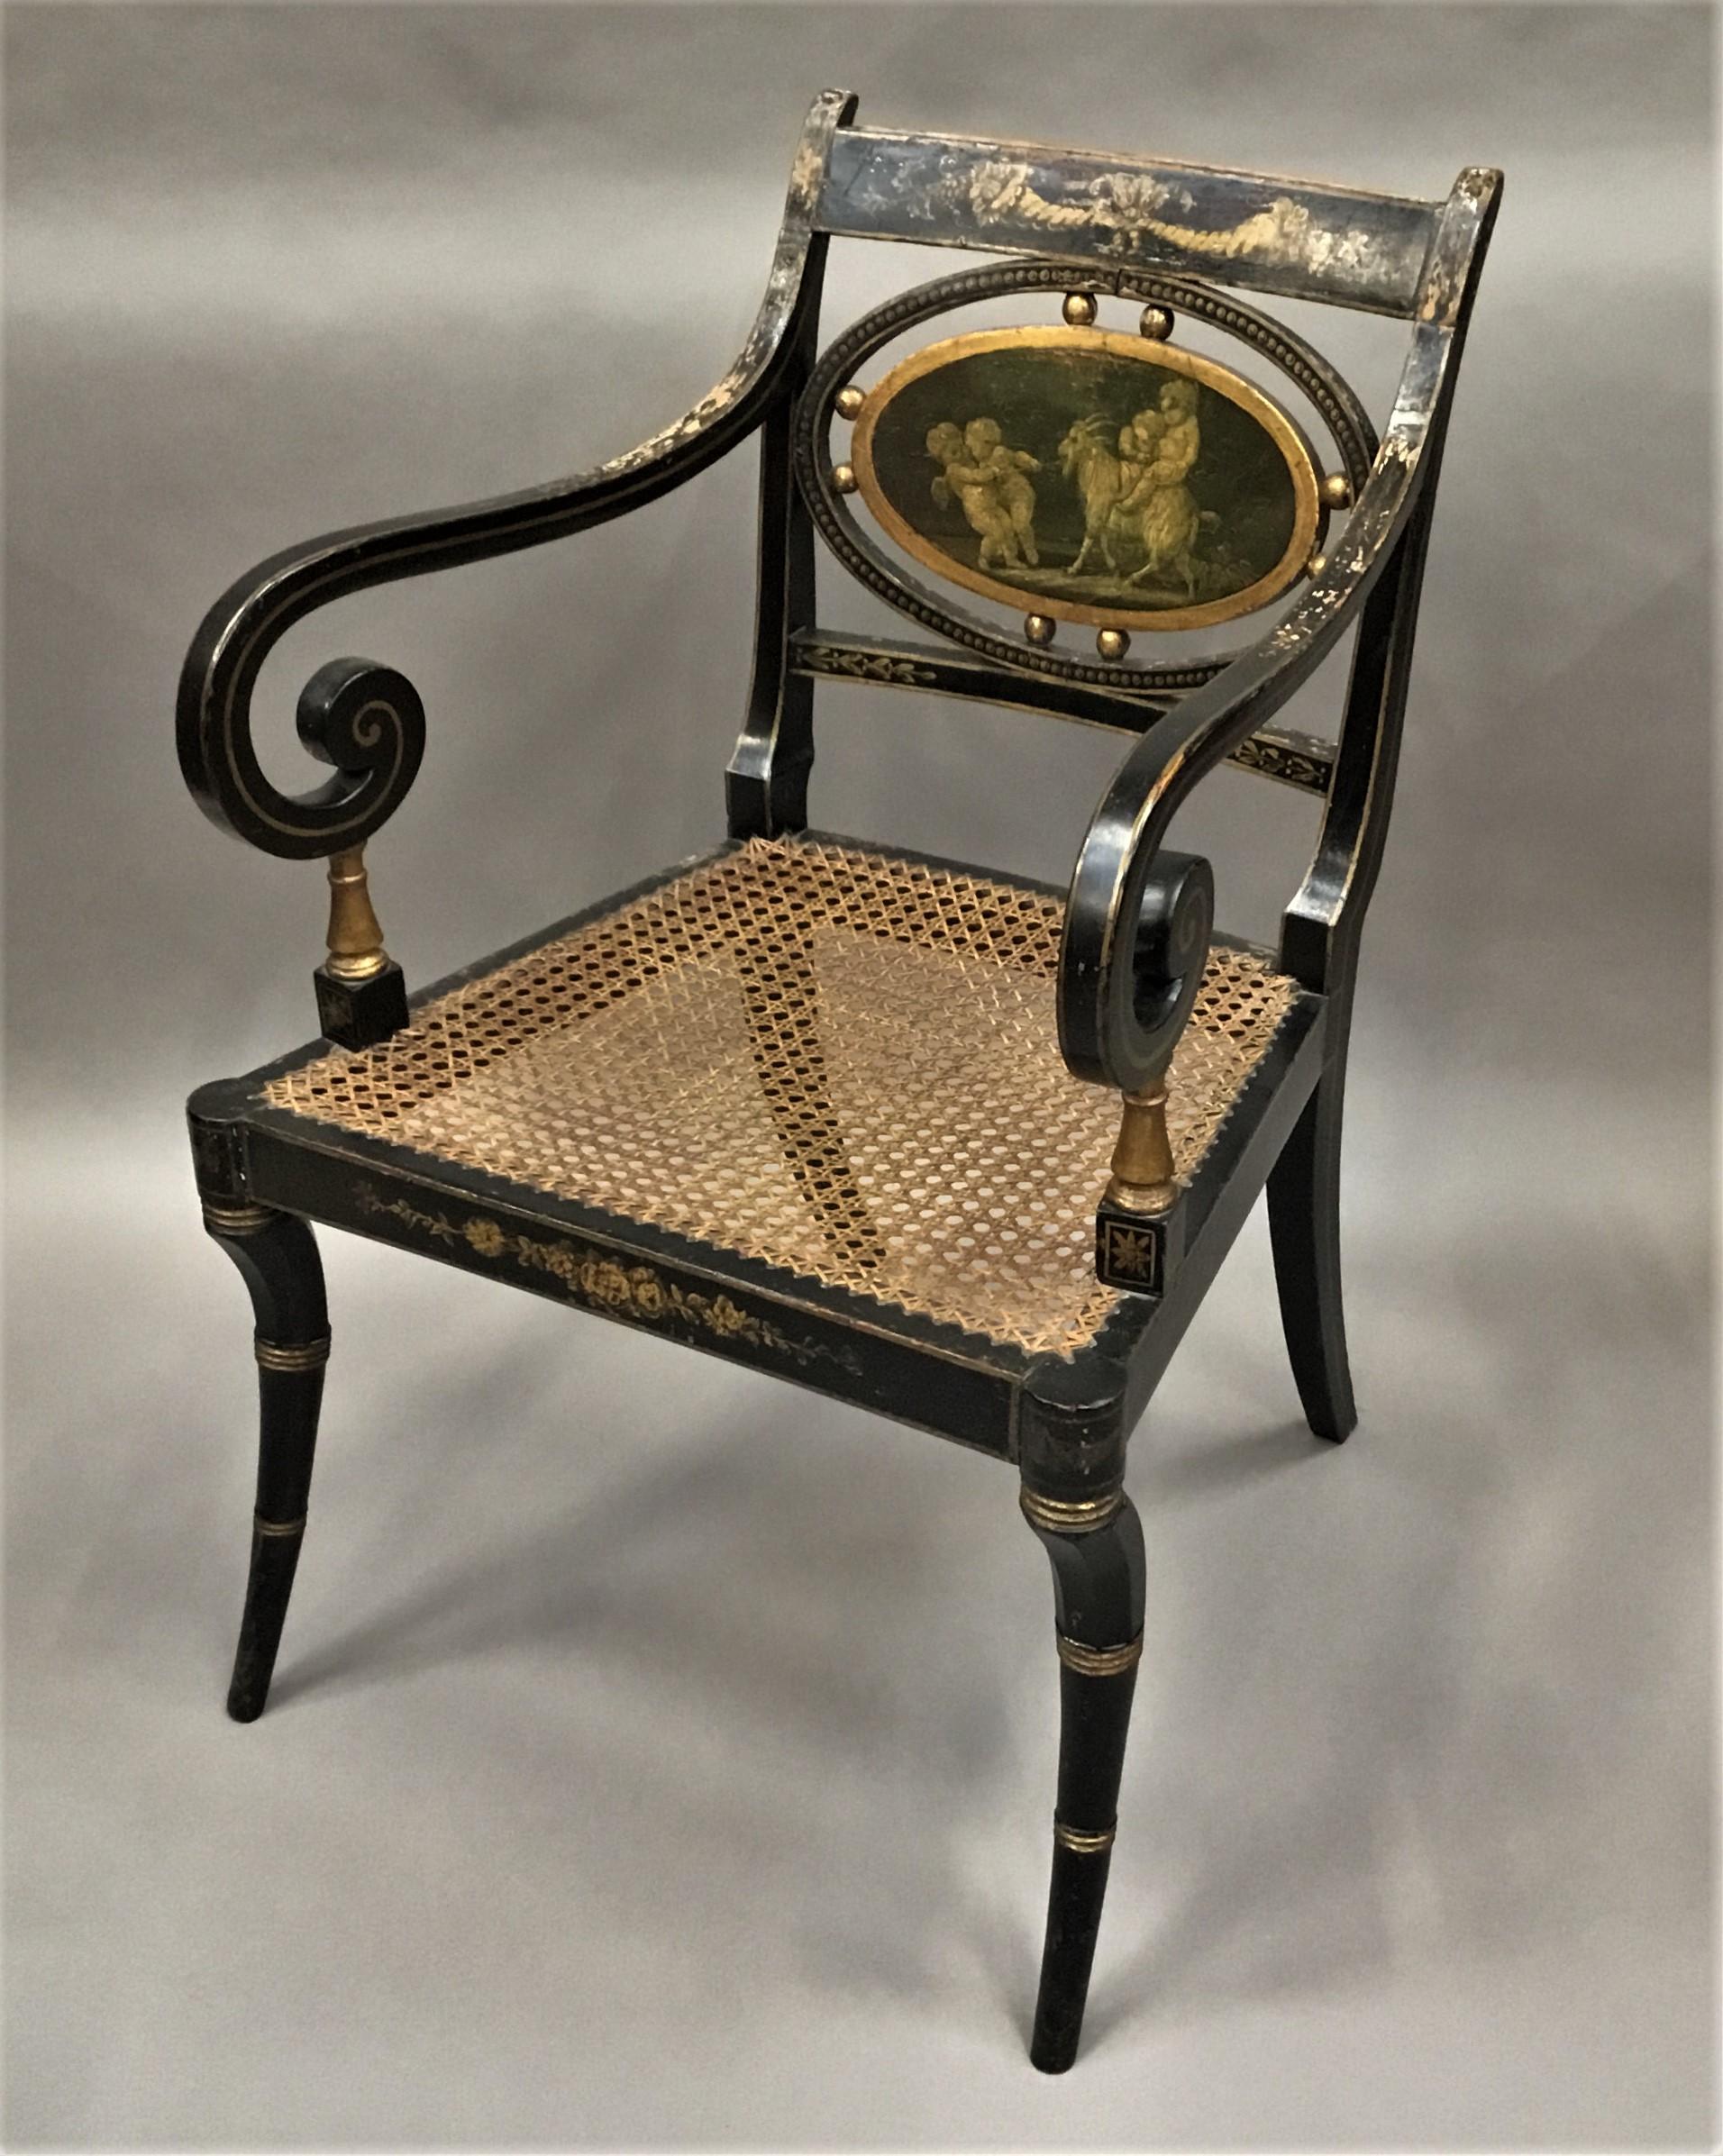 Regency Painted and Parcel Gilt Elbow Chair In Good Condition For Sale In Moreton-in-Marsh, Gloucestershire